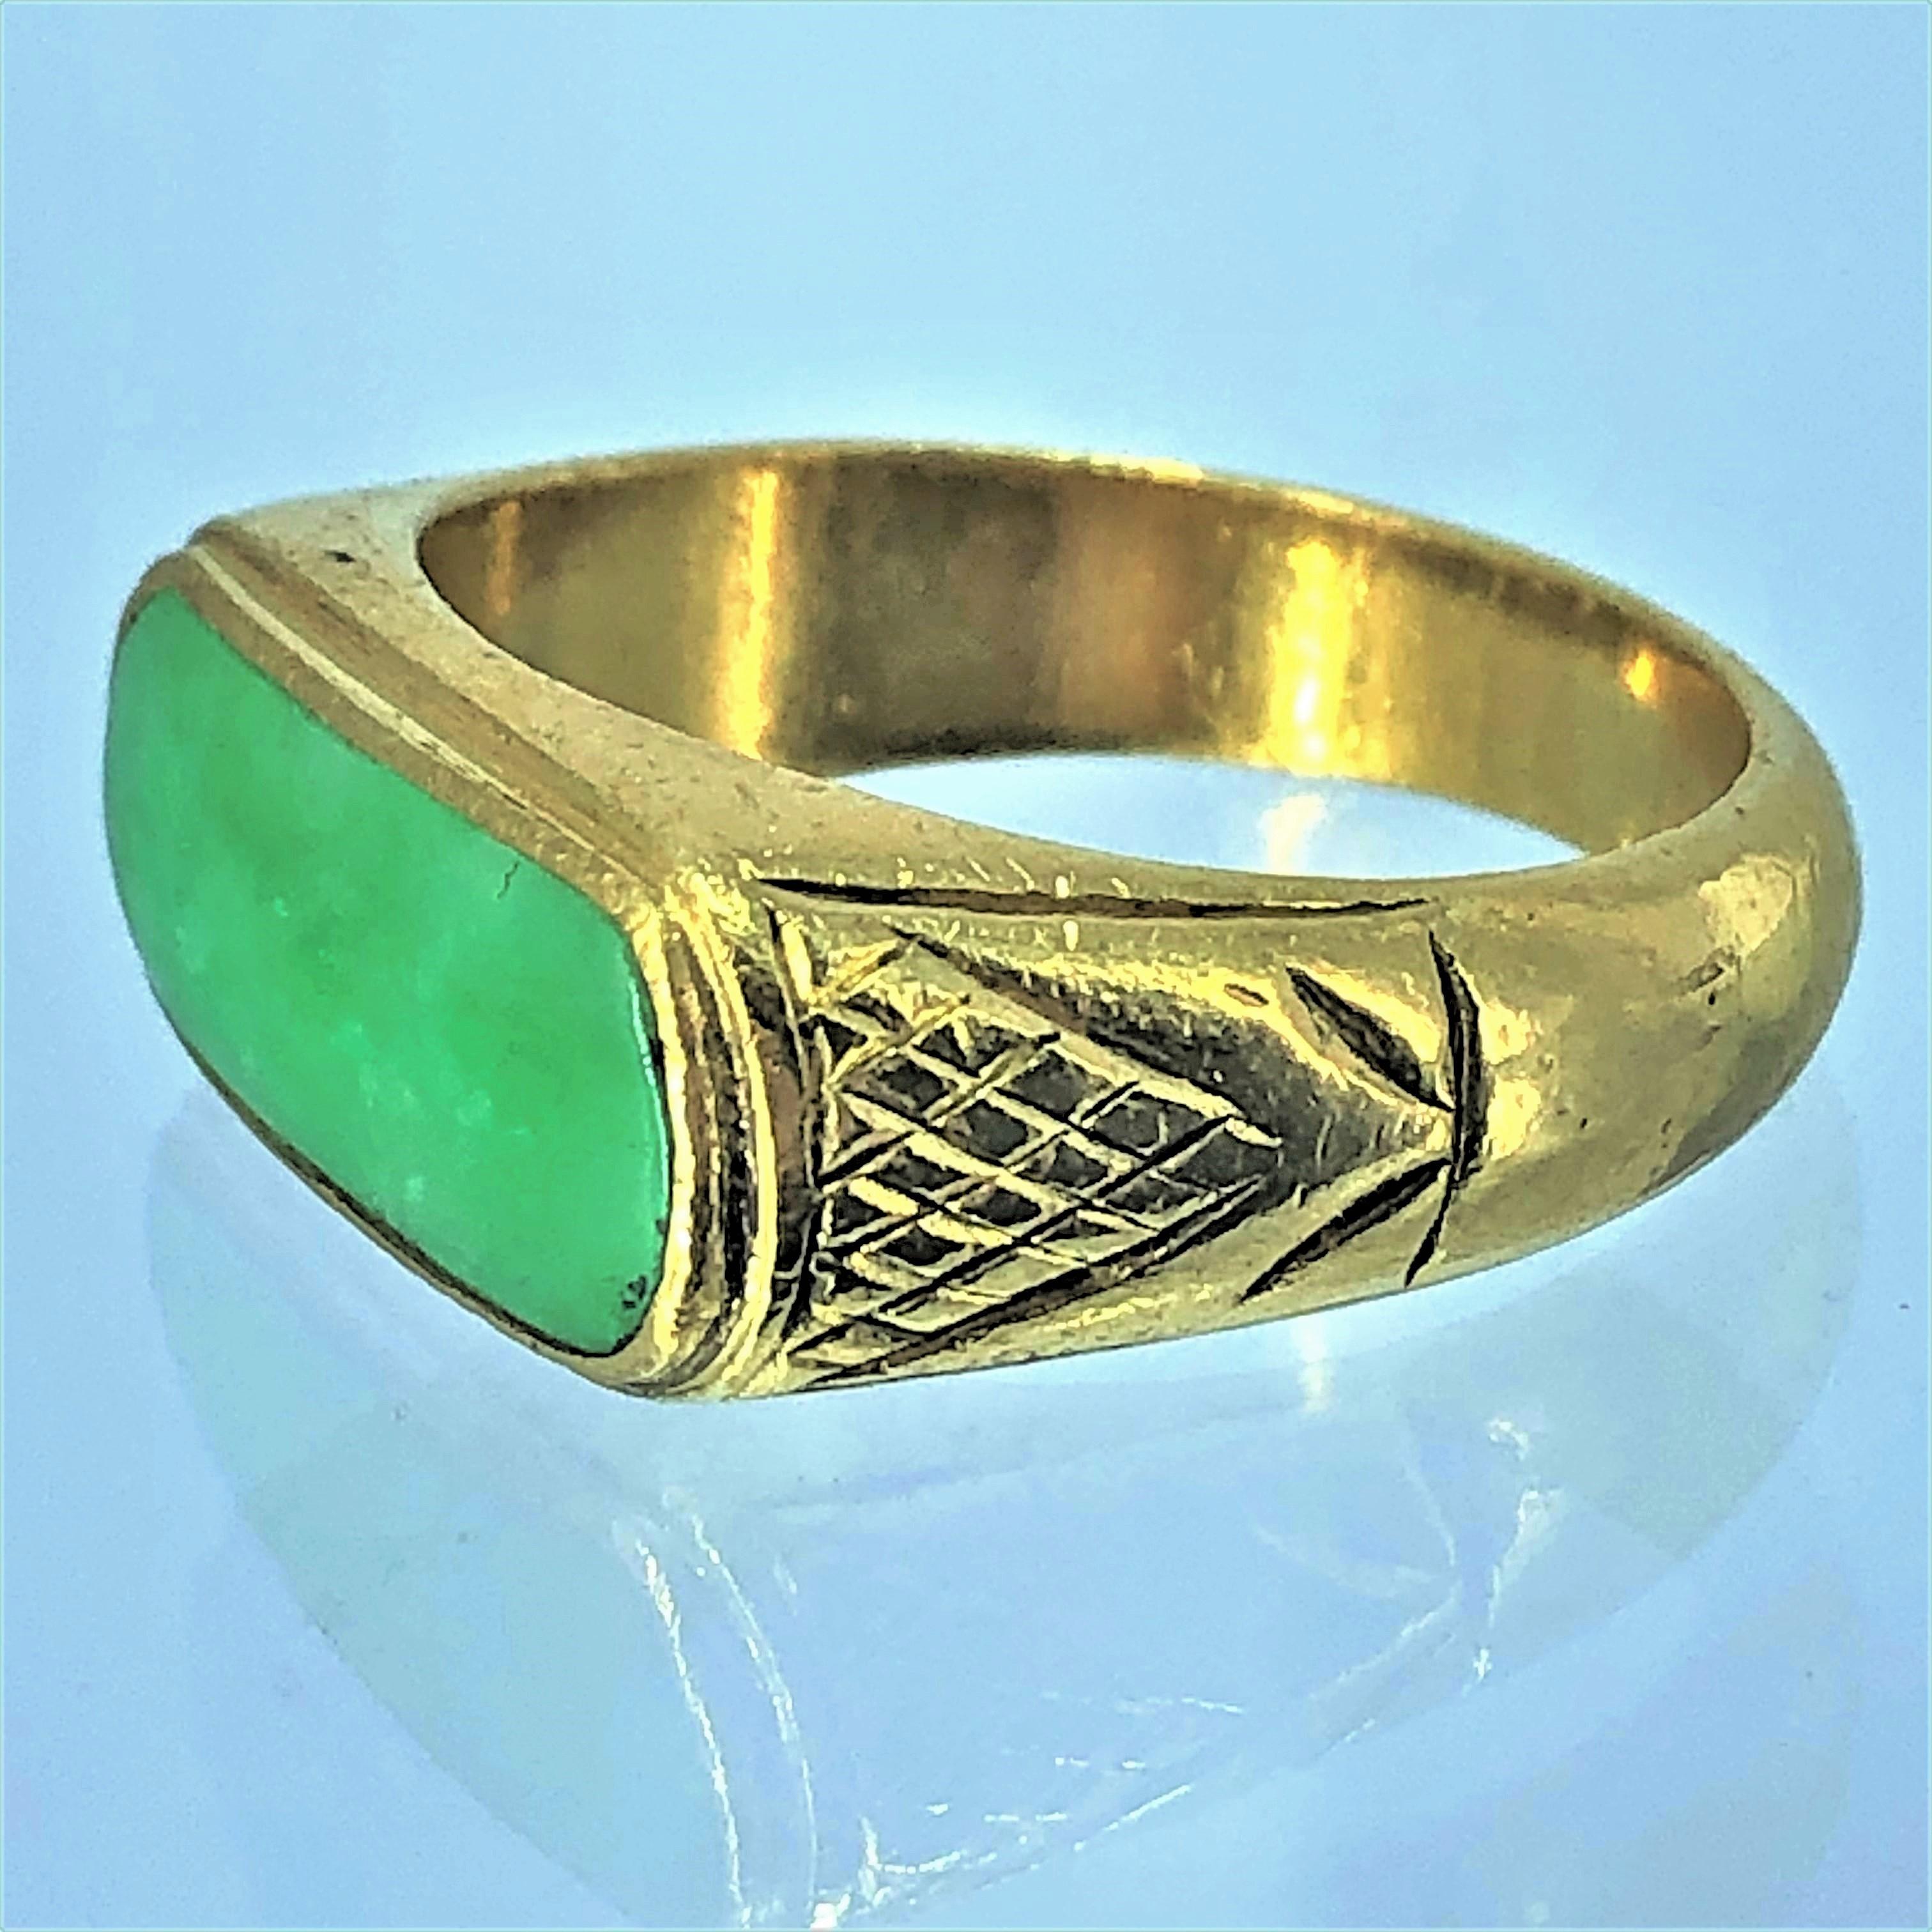 This traditional gentleman's ring is made from pure gold, 24K, marked 9999  and is
set with one elongated, capsule shaped, apple jade cabochon.  The ring measure
13/16 inch (21mm)  long by just under 3/8 inch (9.5mm) wide. Gross weight 11.3grams. 